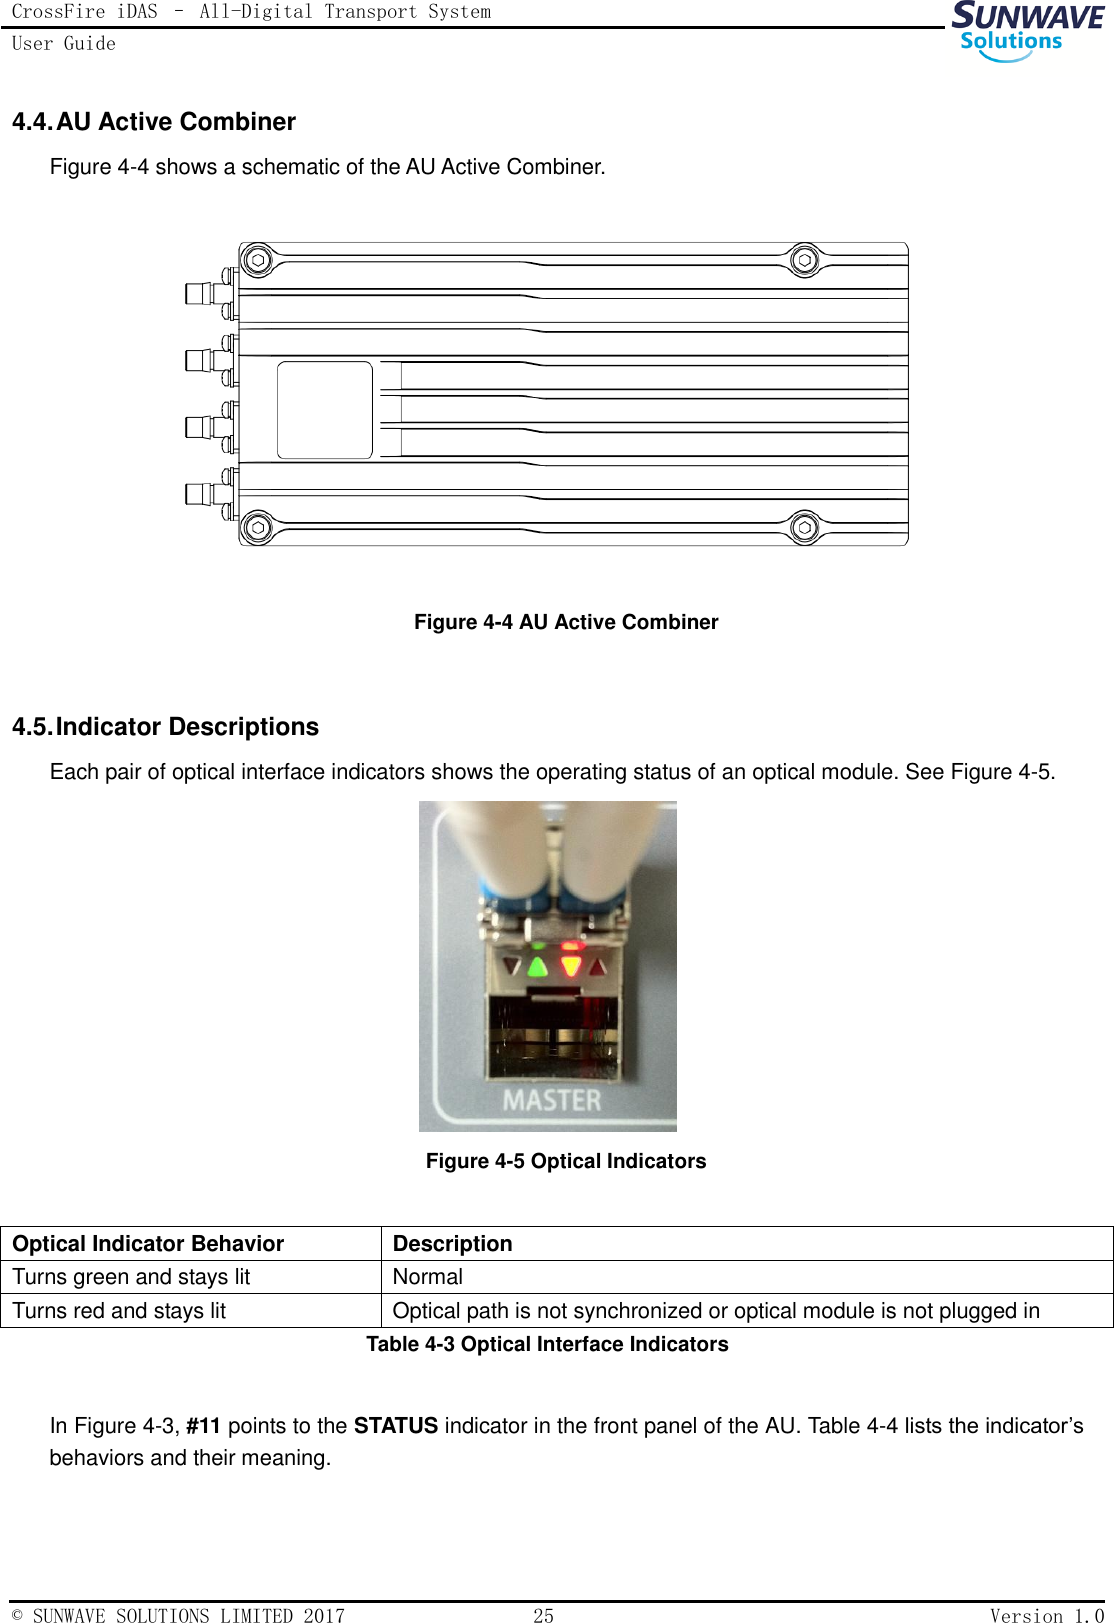 CrossFire iDAS – All-Digital Transport System User Guide   © SUNWAVE SOLUTIONS LIMITED 2017  25  Version 1.0  4.4. AU Active Combiner Figure 4-4 shows a schematic of the AU Active Combiner.  Figure 4-4 AU Active Combiner  4.5. Indicator Descriptions Each pair of optical interface indicators shows the operating status of an optical module. See Figure 4-5.    Figure 4-5 Optical Indicators  Optical Indicator Behavior Description Turns green and stays lit Normal Turns red and stays lit Optical path is not synchronized or optical module is not plugged in Table 4-3 Optical Interface Indicators  In Figure 4-3, #11 points to the STATUS indicator in the front panel of the AU. Table 4-4 lists the indicator’s behaviors and their meaning.  